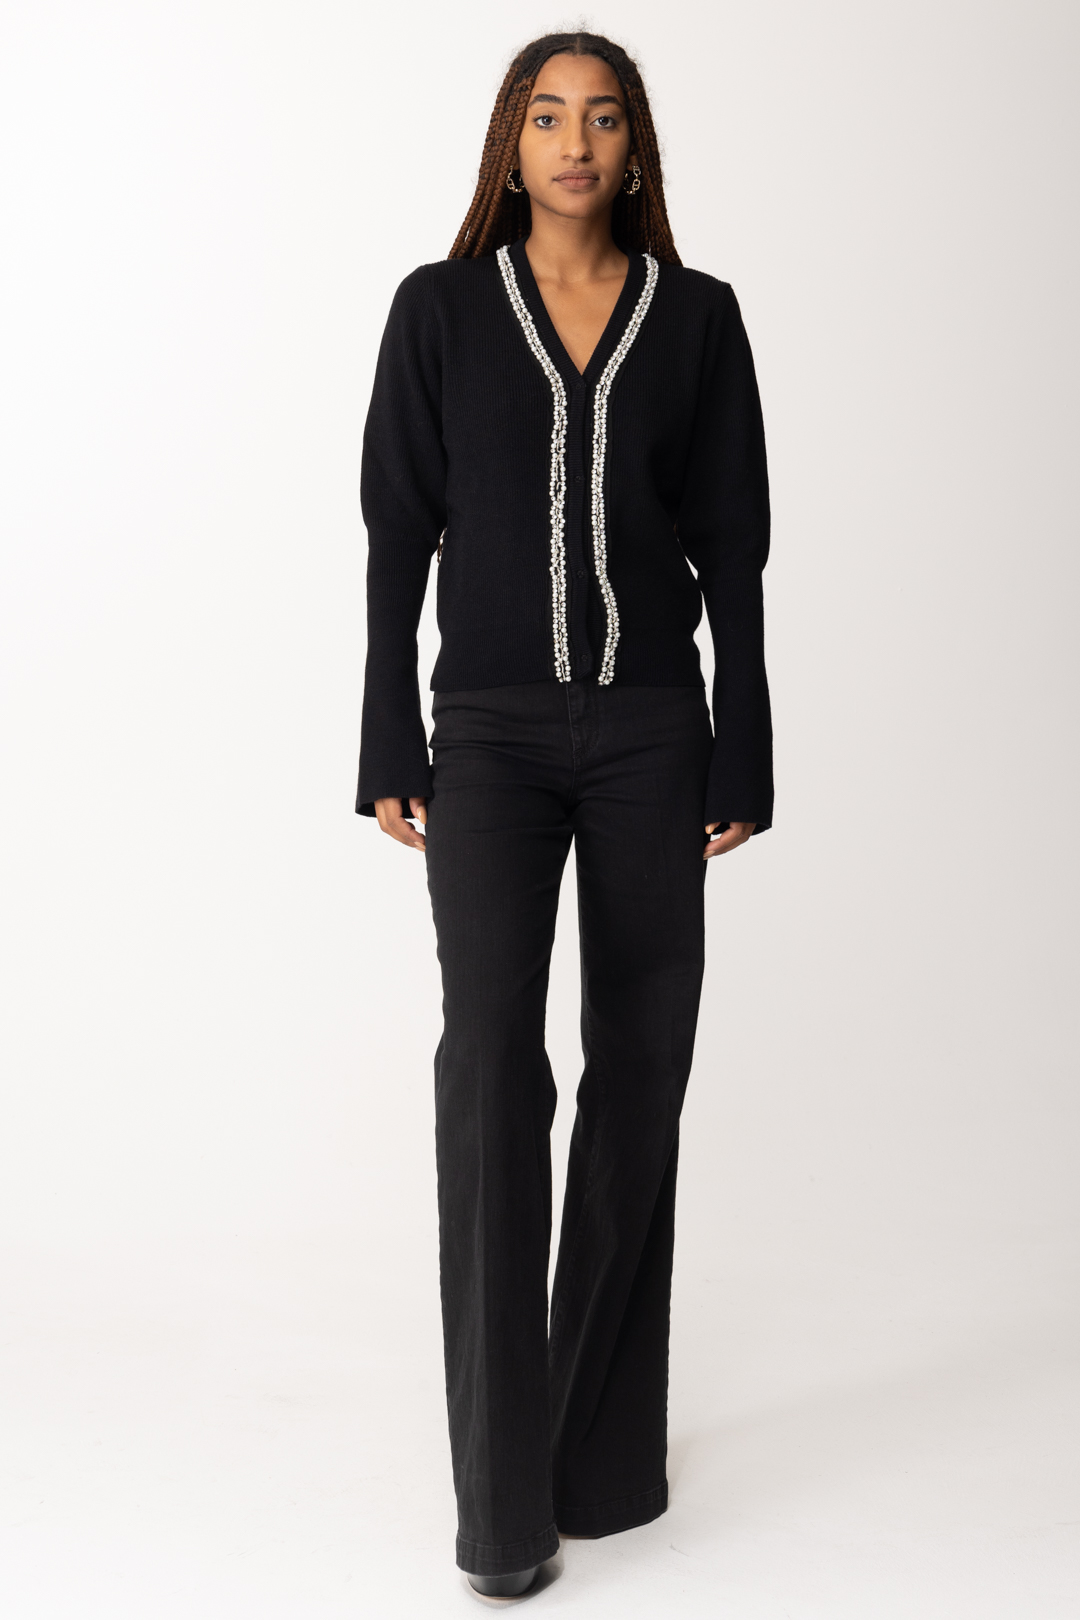 Preview: Gaelle Paris Short cardigan with rhinestones and pearls Nero